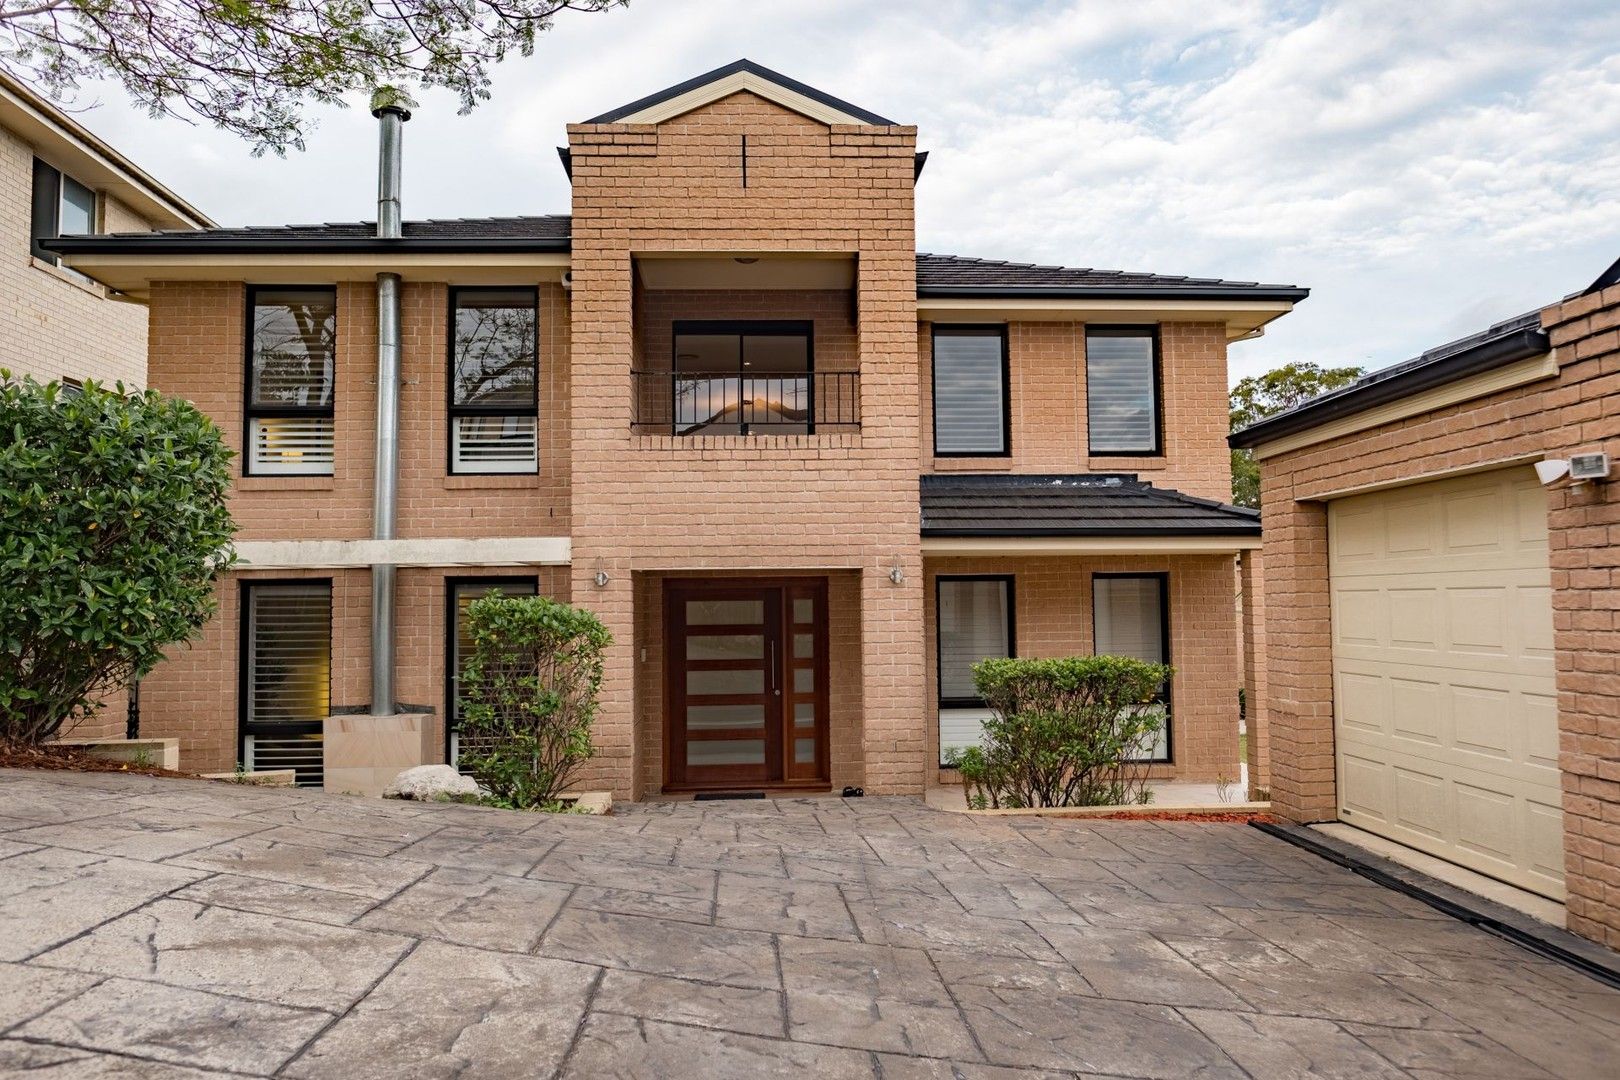 178 Epping Road, Marsfield NSW 2122